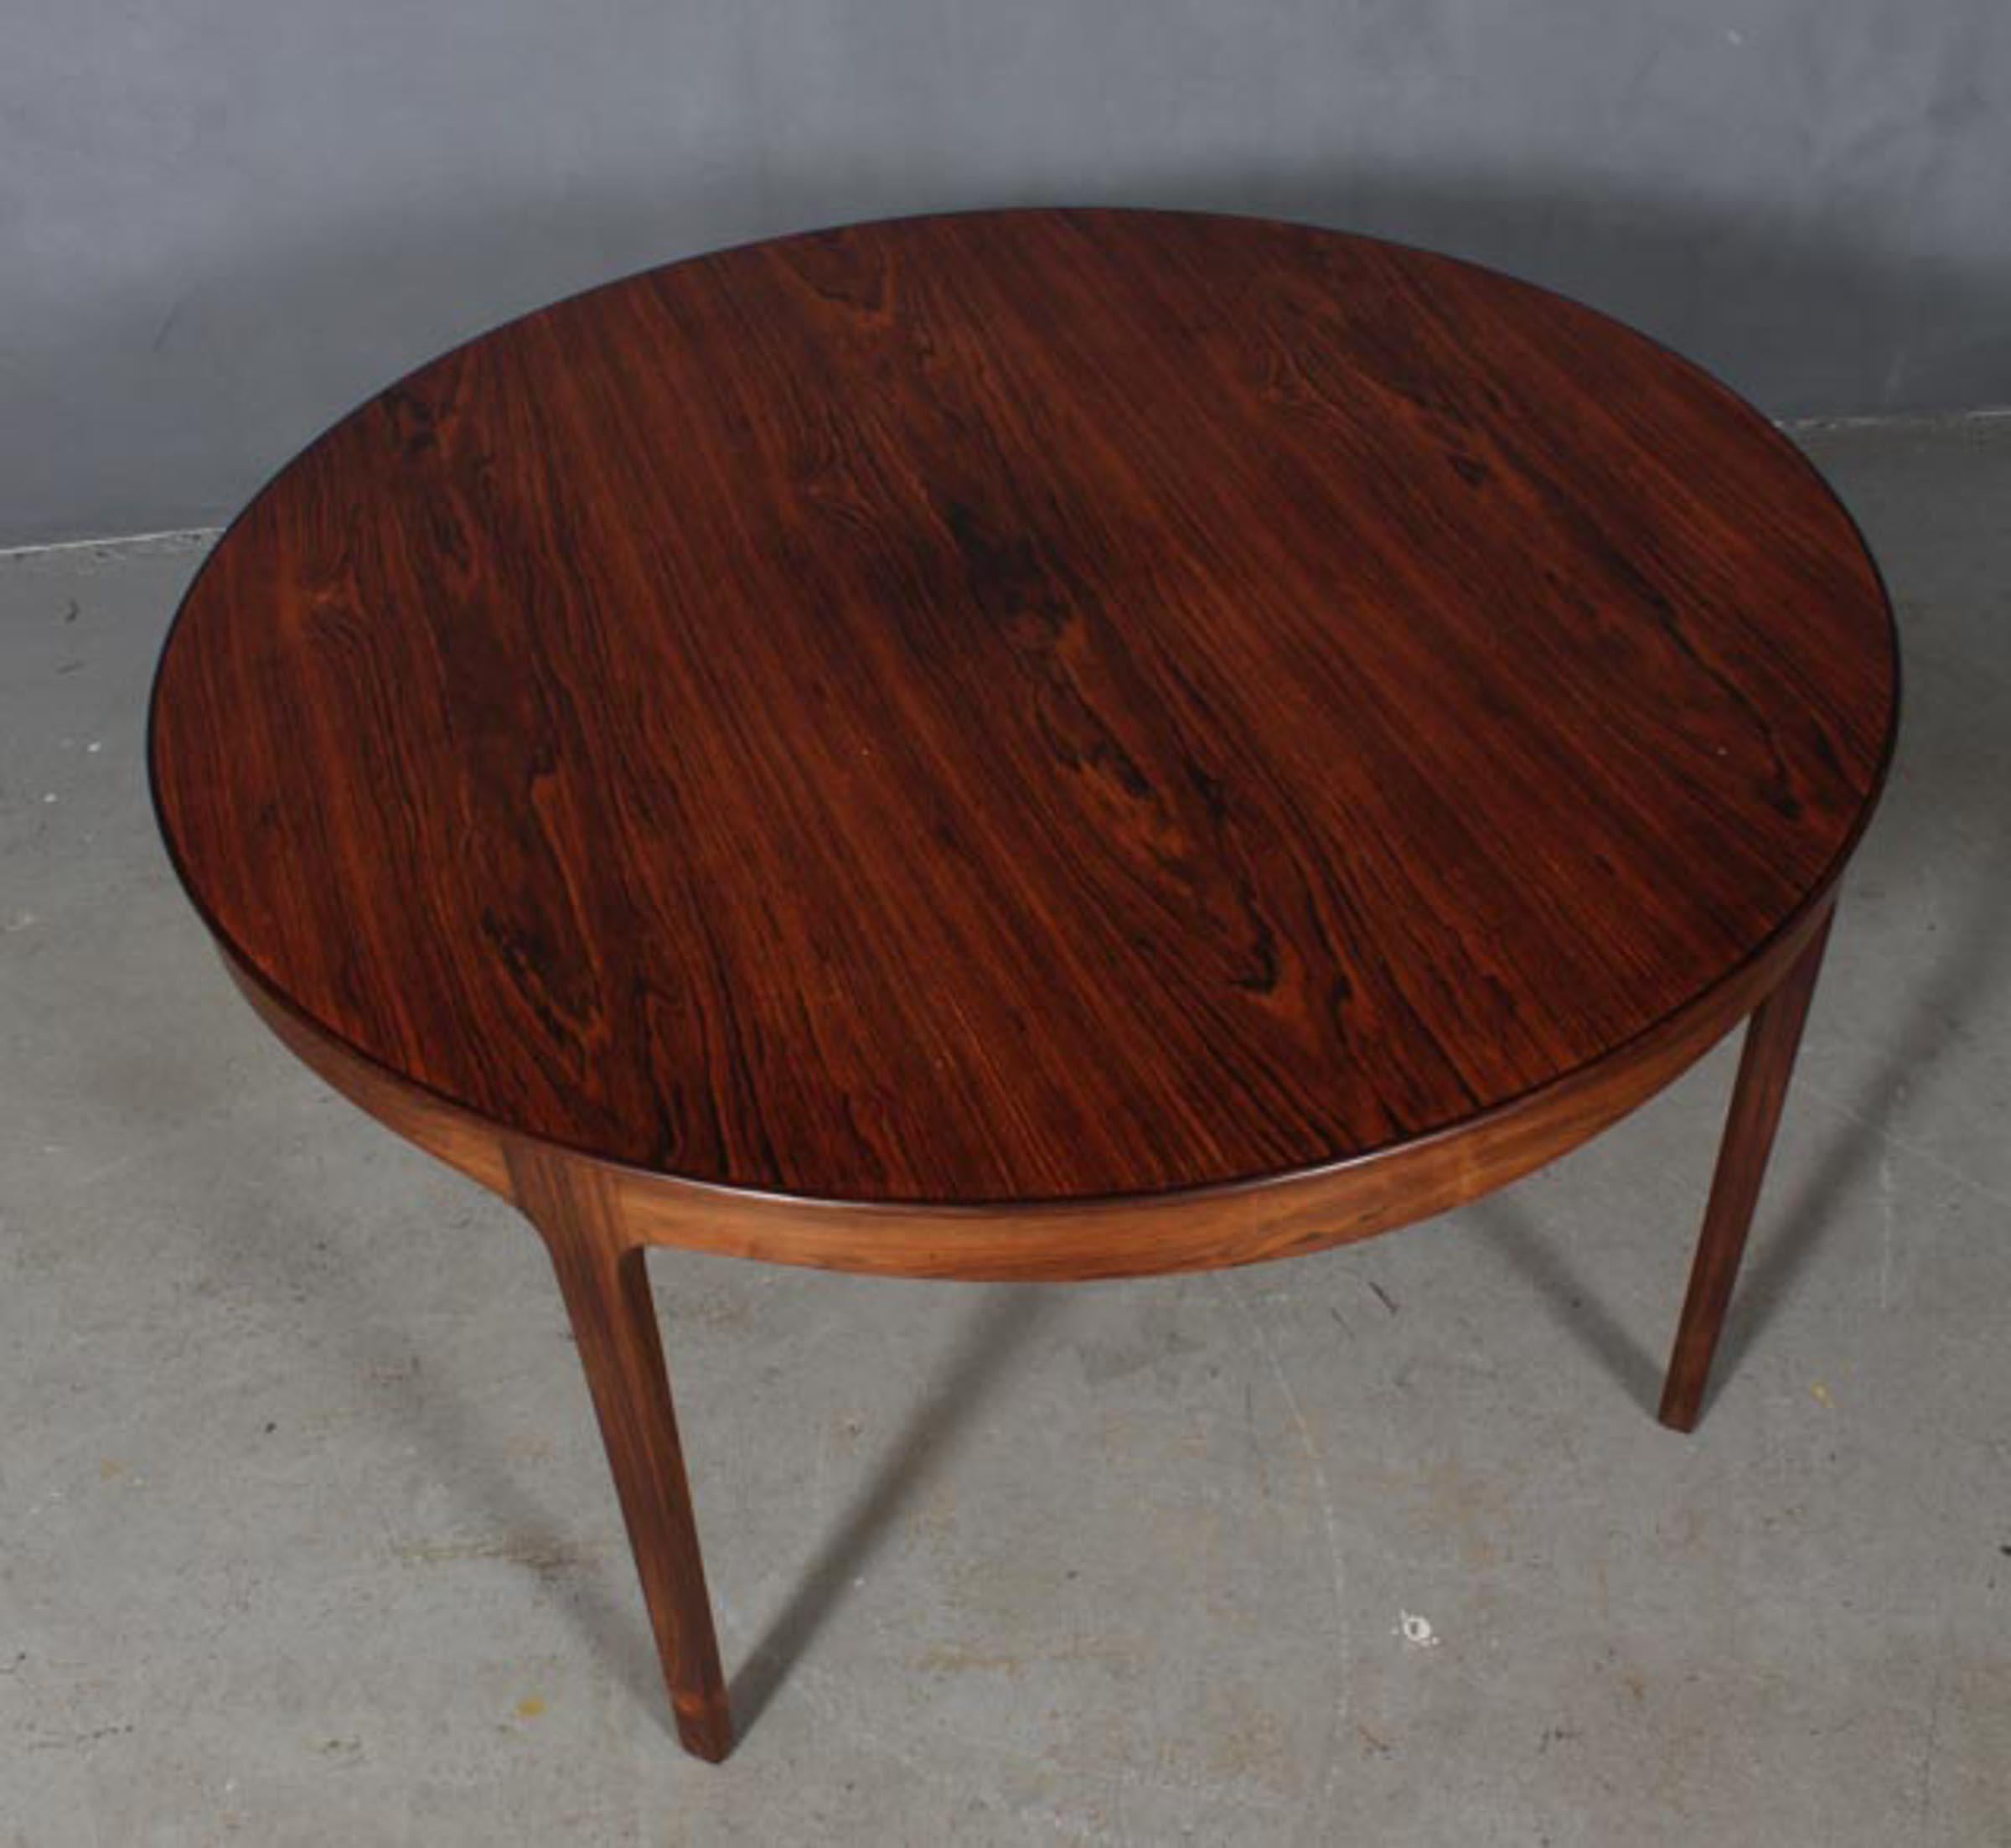 Ole Wanscher coffee table of rosewood.

Made by A. J. Iversen.

